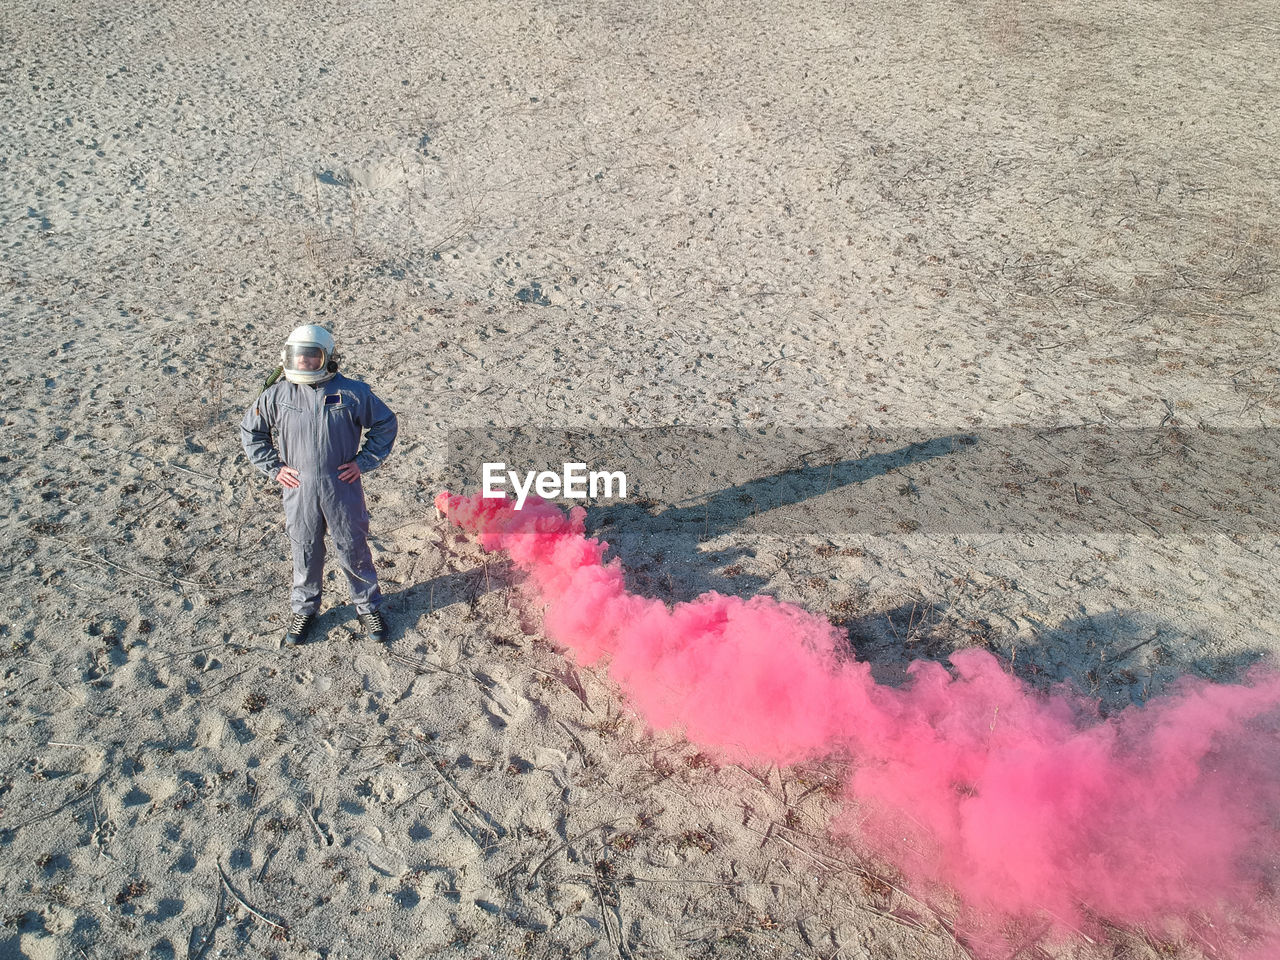 High angle view of man standing by distress flare on ground